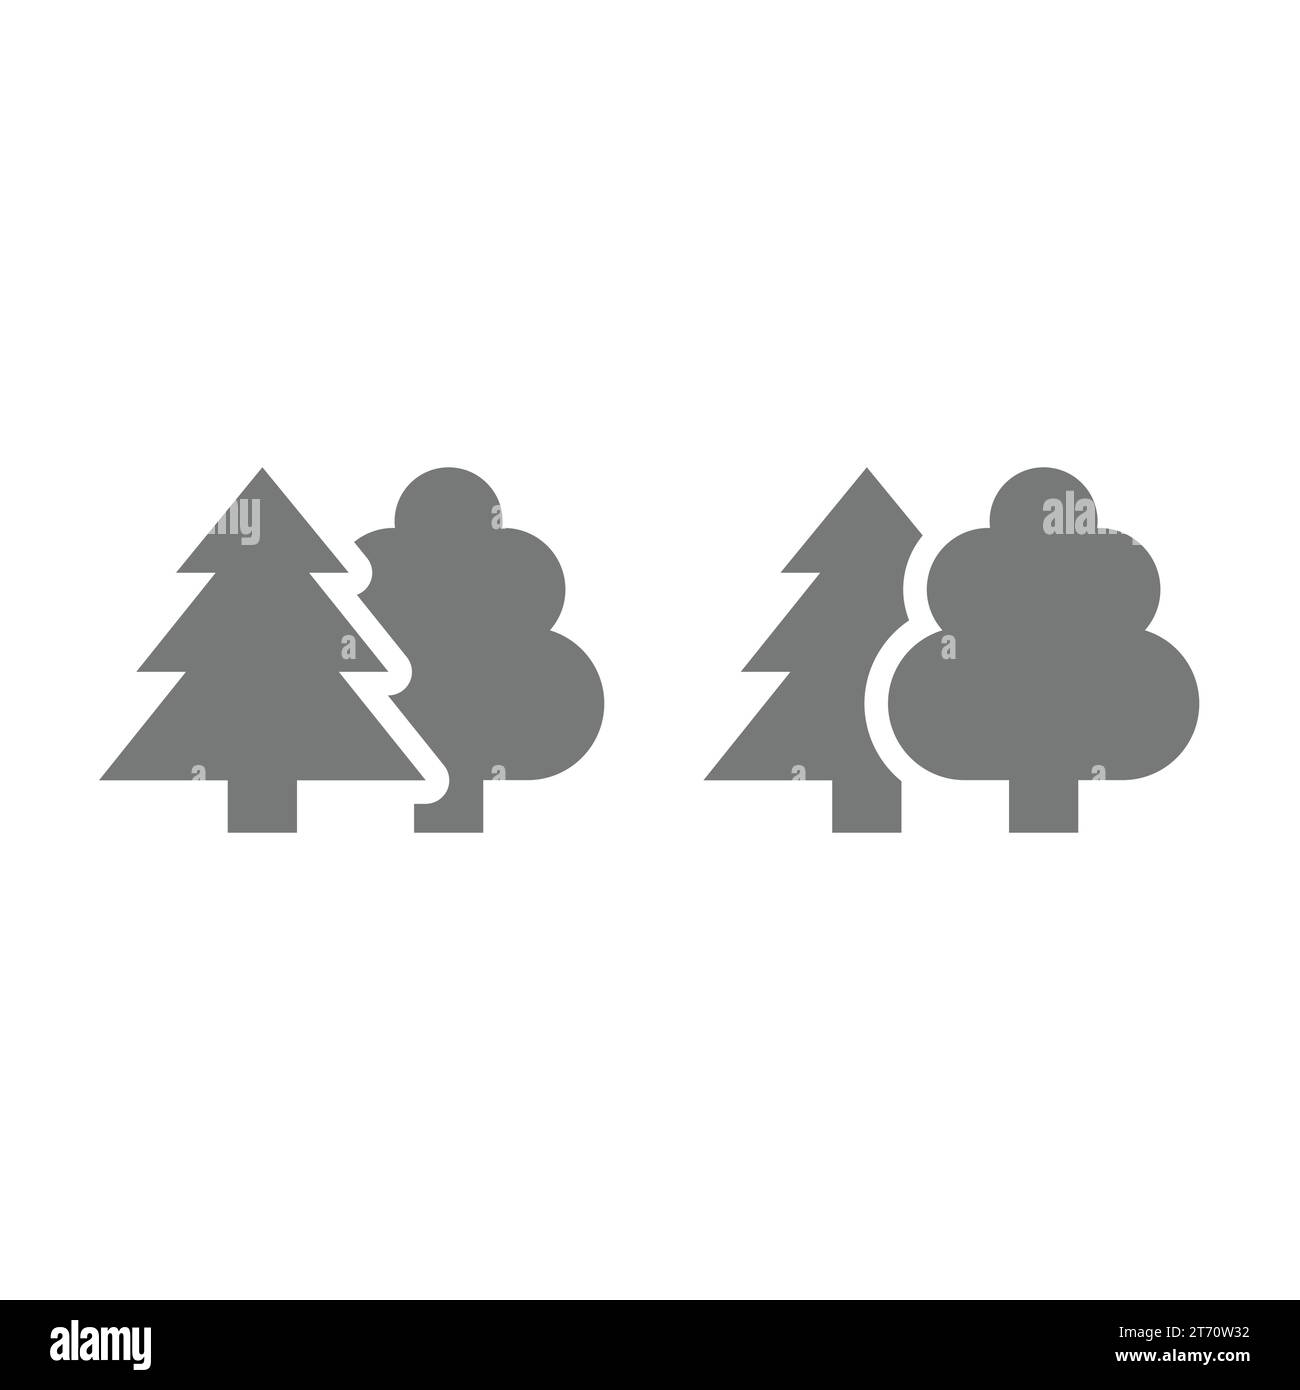 Trees, pine and broadleaf vector icon. Tree, forest outdoors and nature symbol. Stock Vector